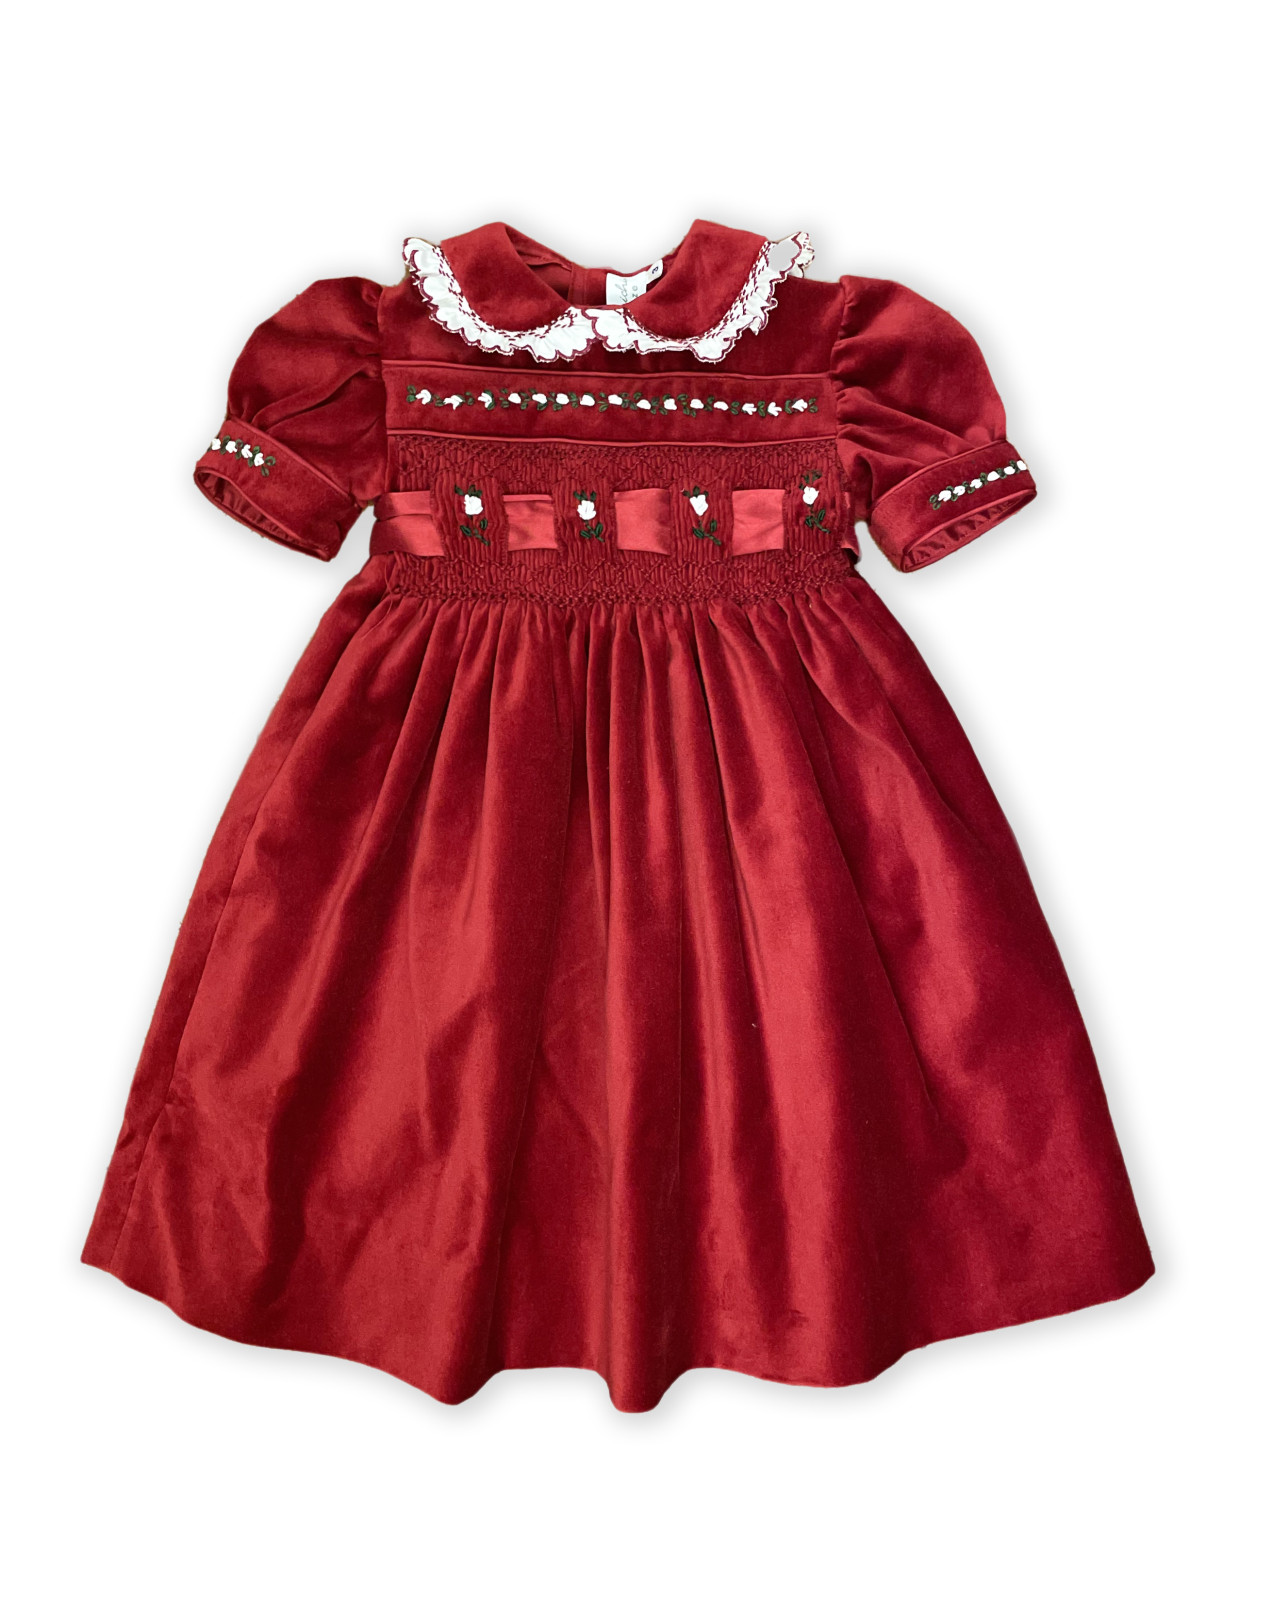 Red velvet dress with embroideries and smock